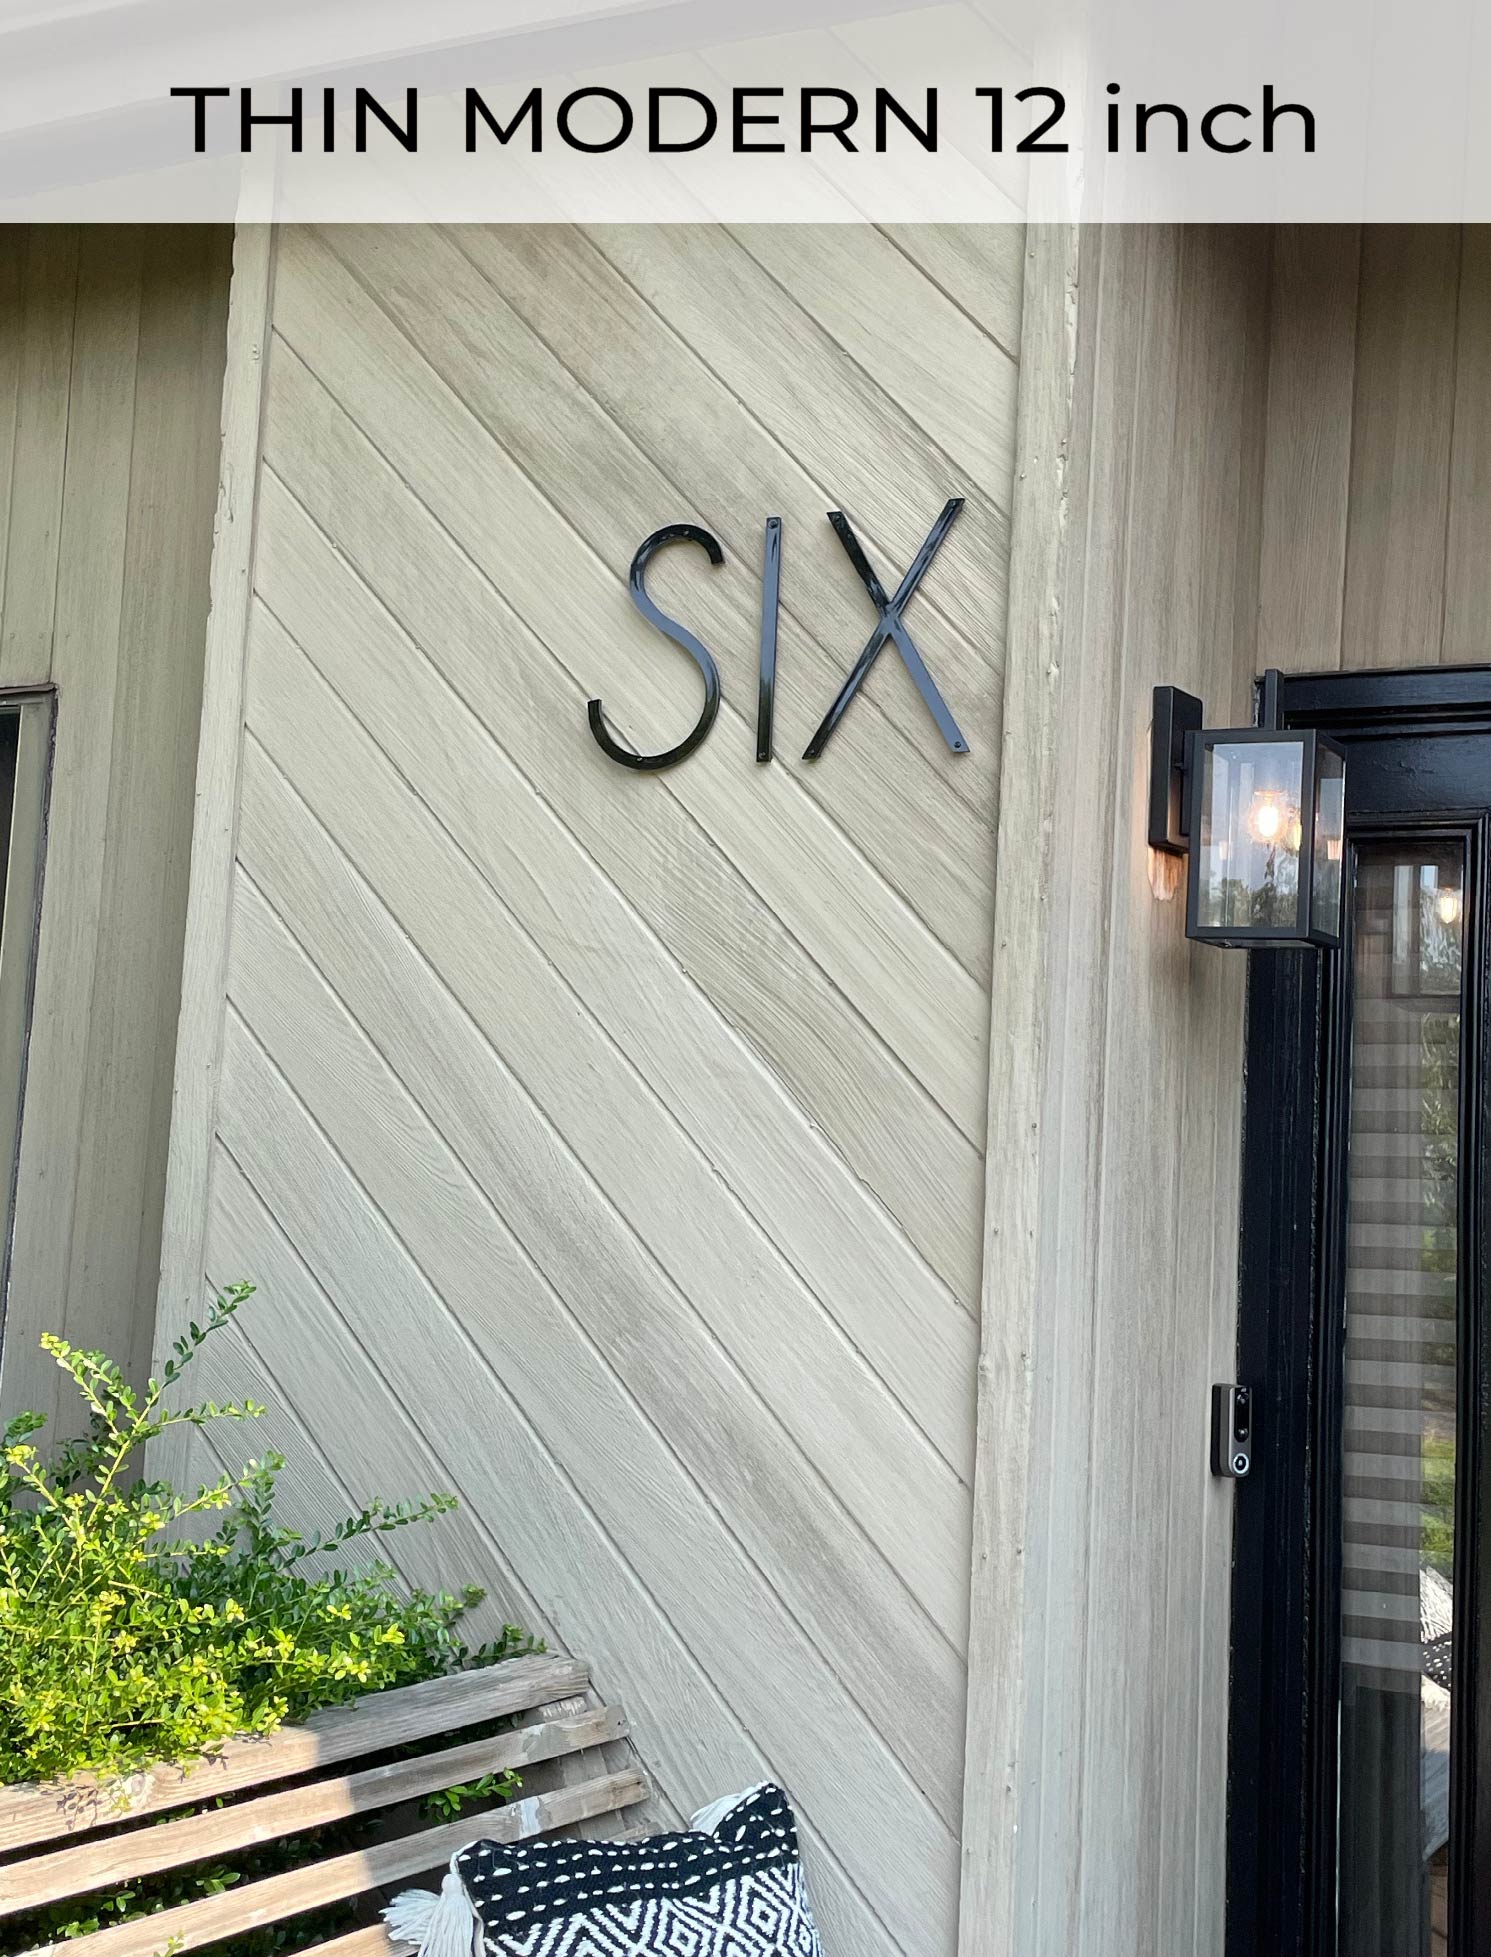 THIN MODERN house numbers and letters spelling SIX